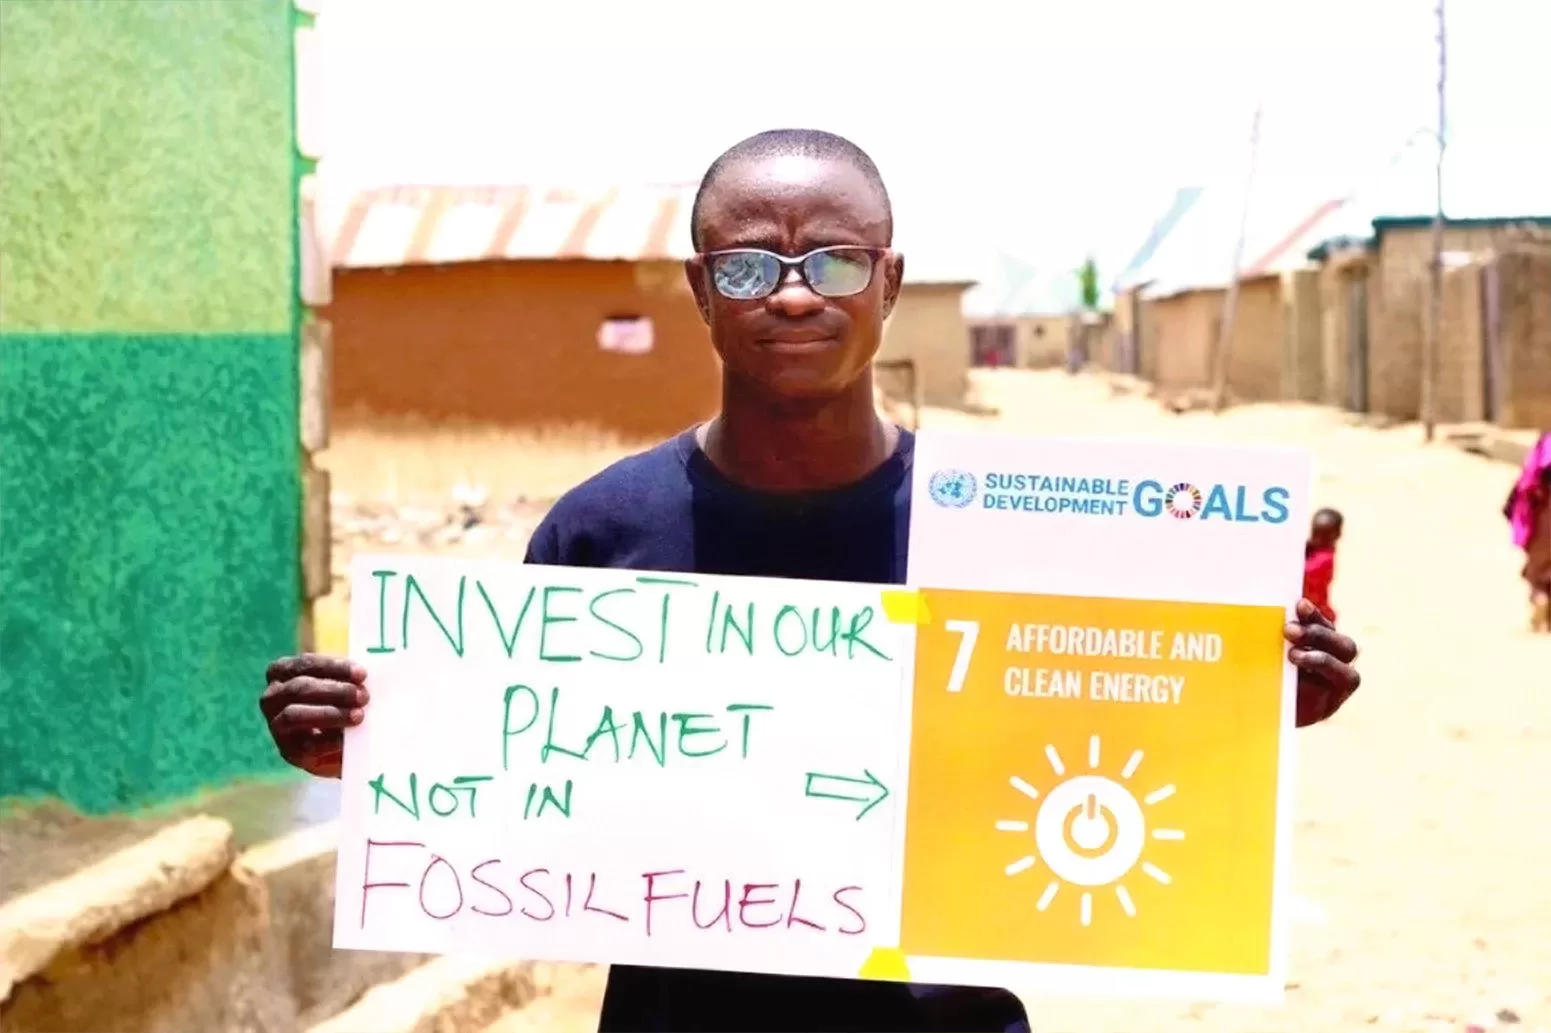 Ibrahim Muhammad Shamsuddin holding a placard about affordable and clean energy. Photo Courtesy : Ibrahim Muhammad Shamsuddin